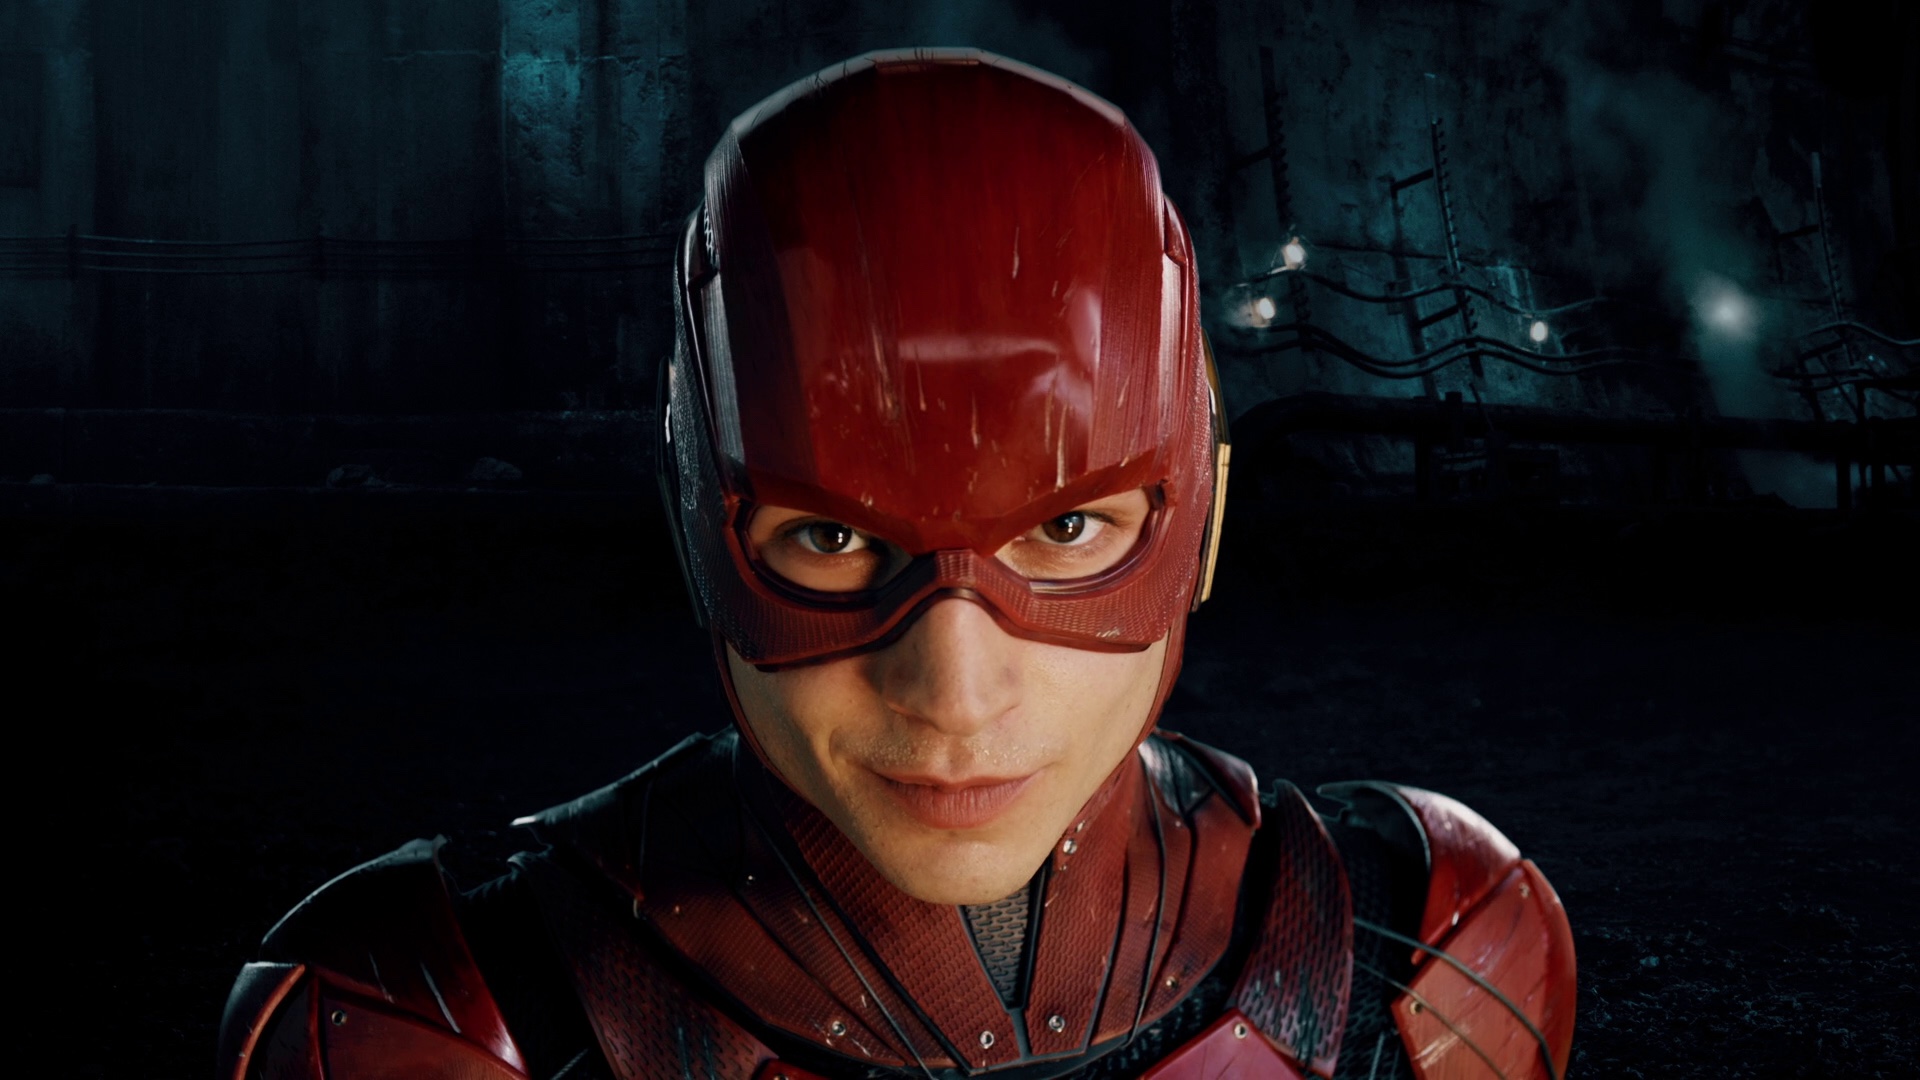 Man of Steel' 2 Almost Happed With 'The Flash' Director Andy Muschietti